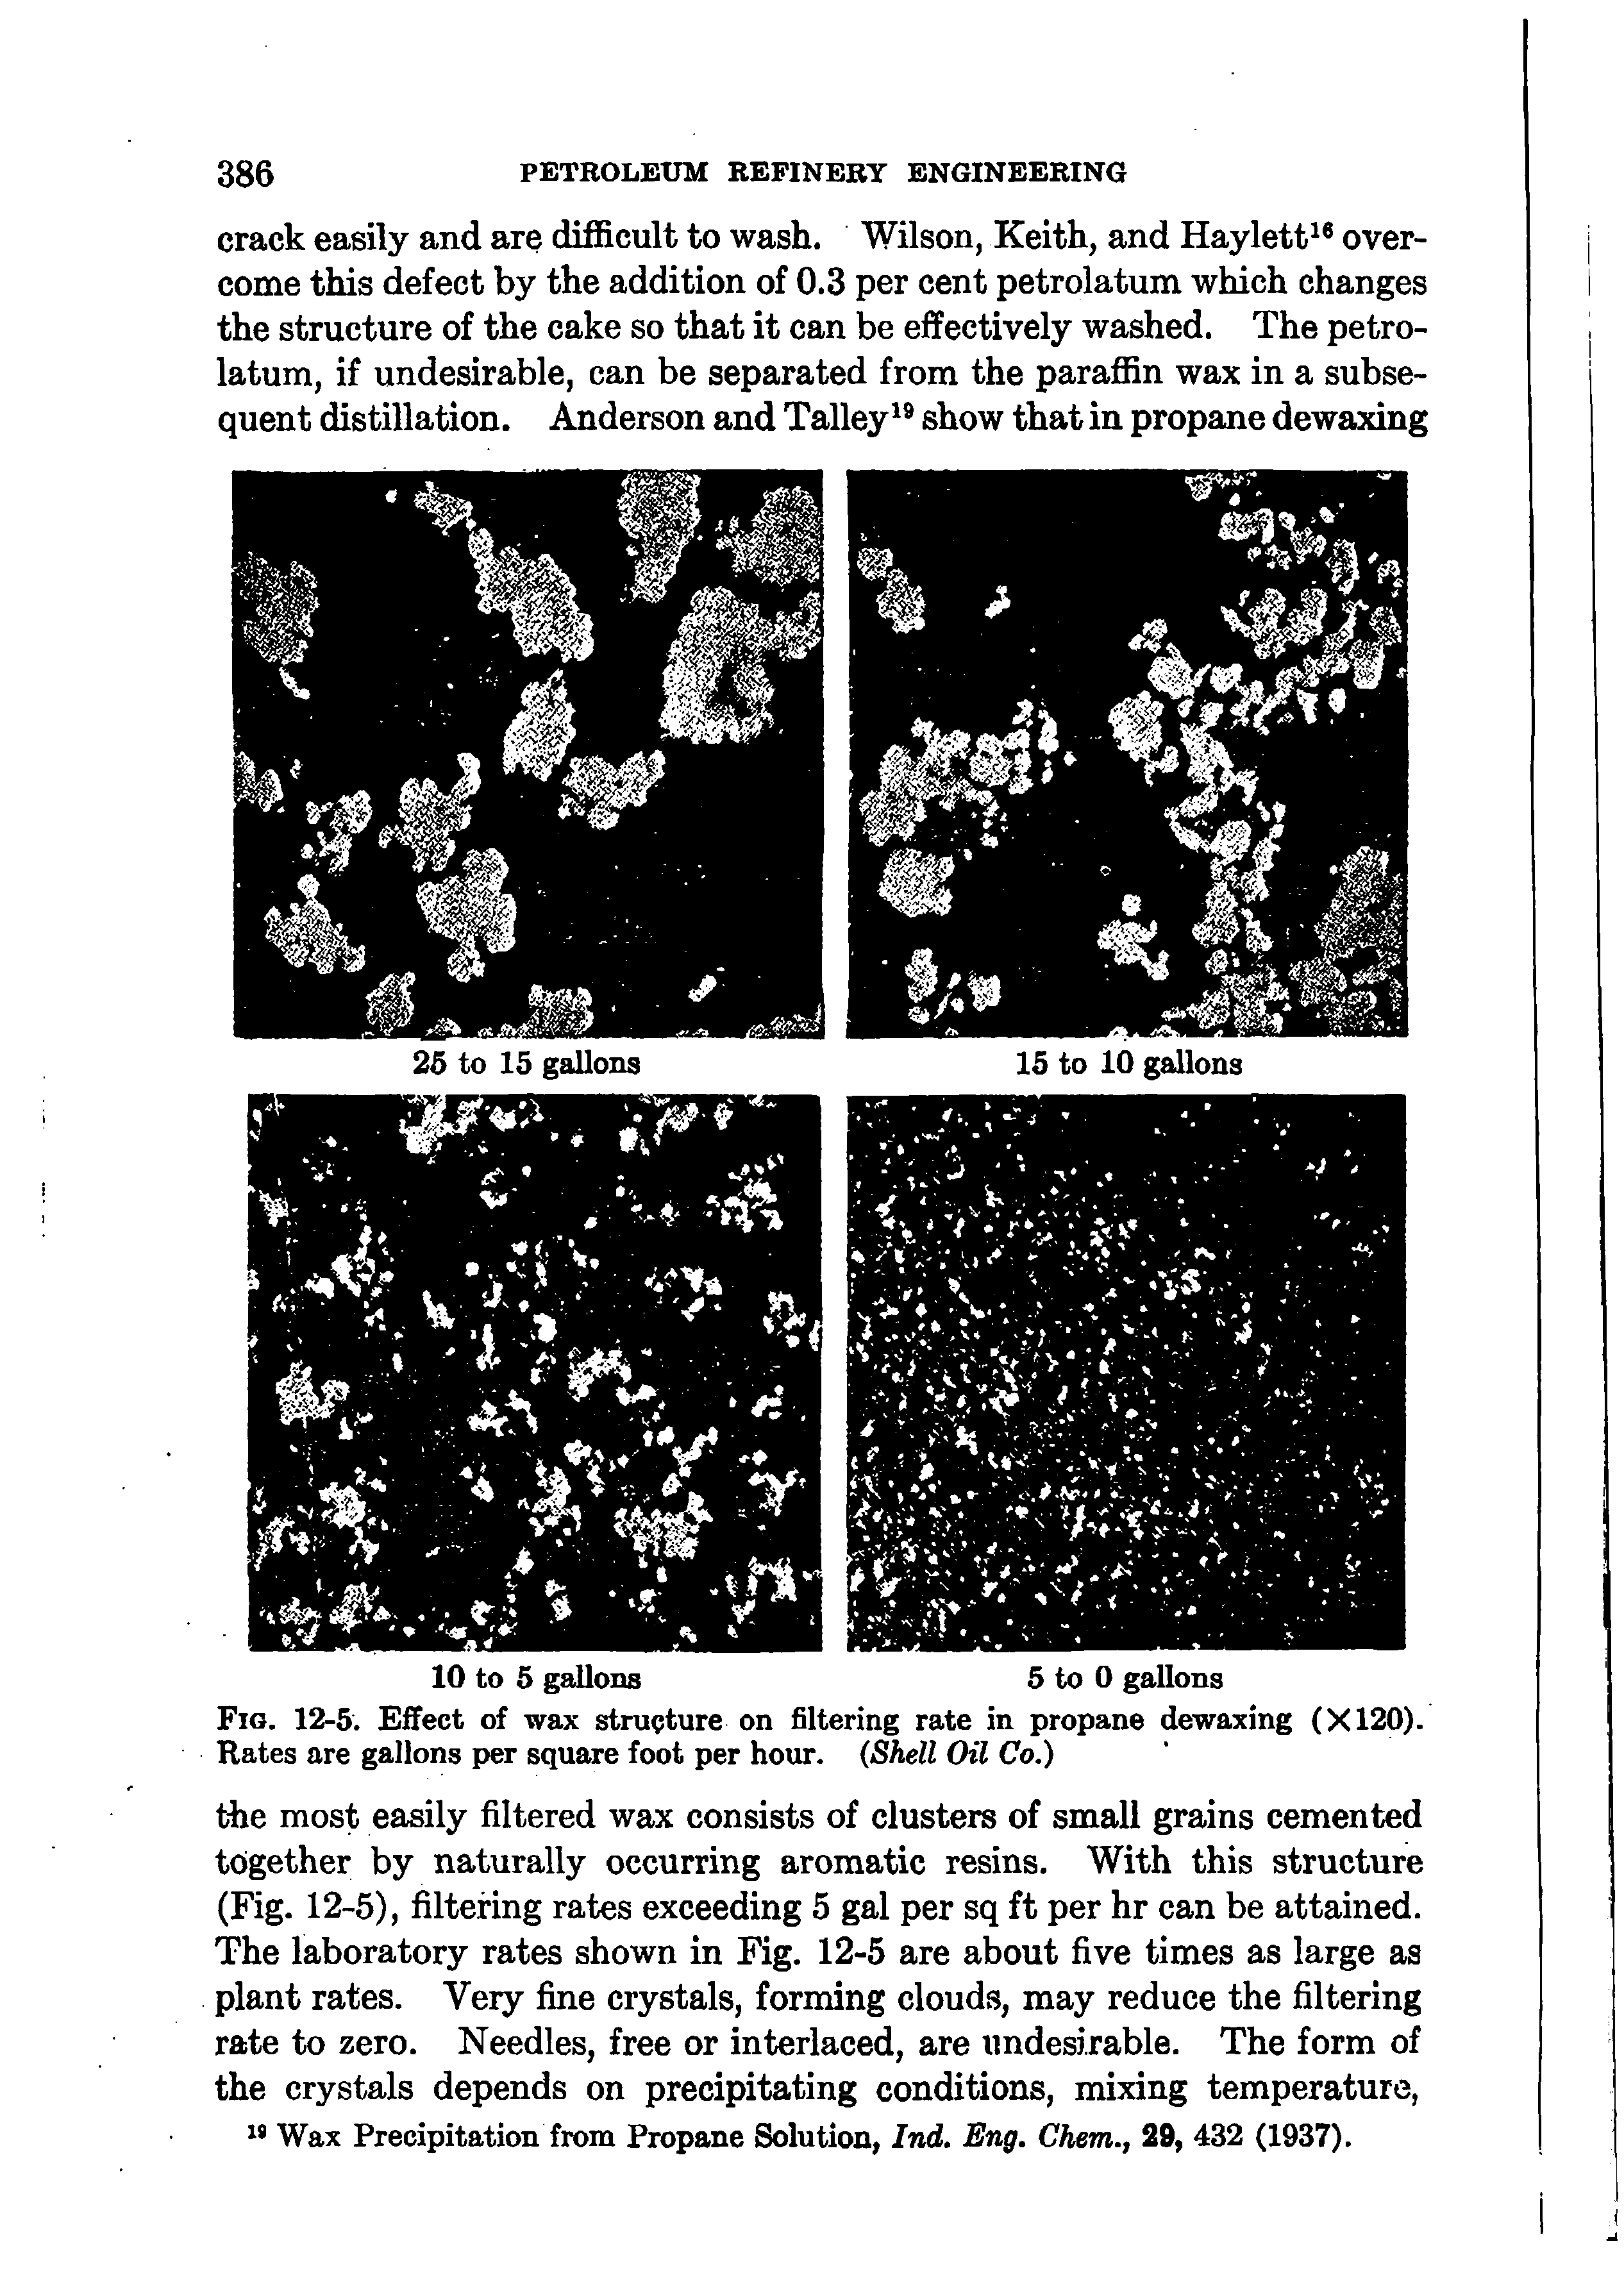 Fig. 12-5. Effect of wax structure on filtering rate in propane dewaxing (X120). Rates are gallons per square foot per hour. (Shell Oil Co.)...